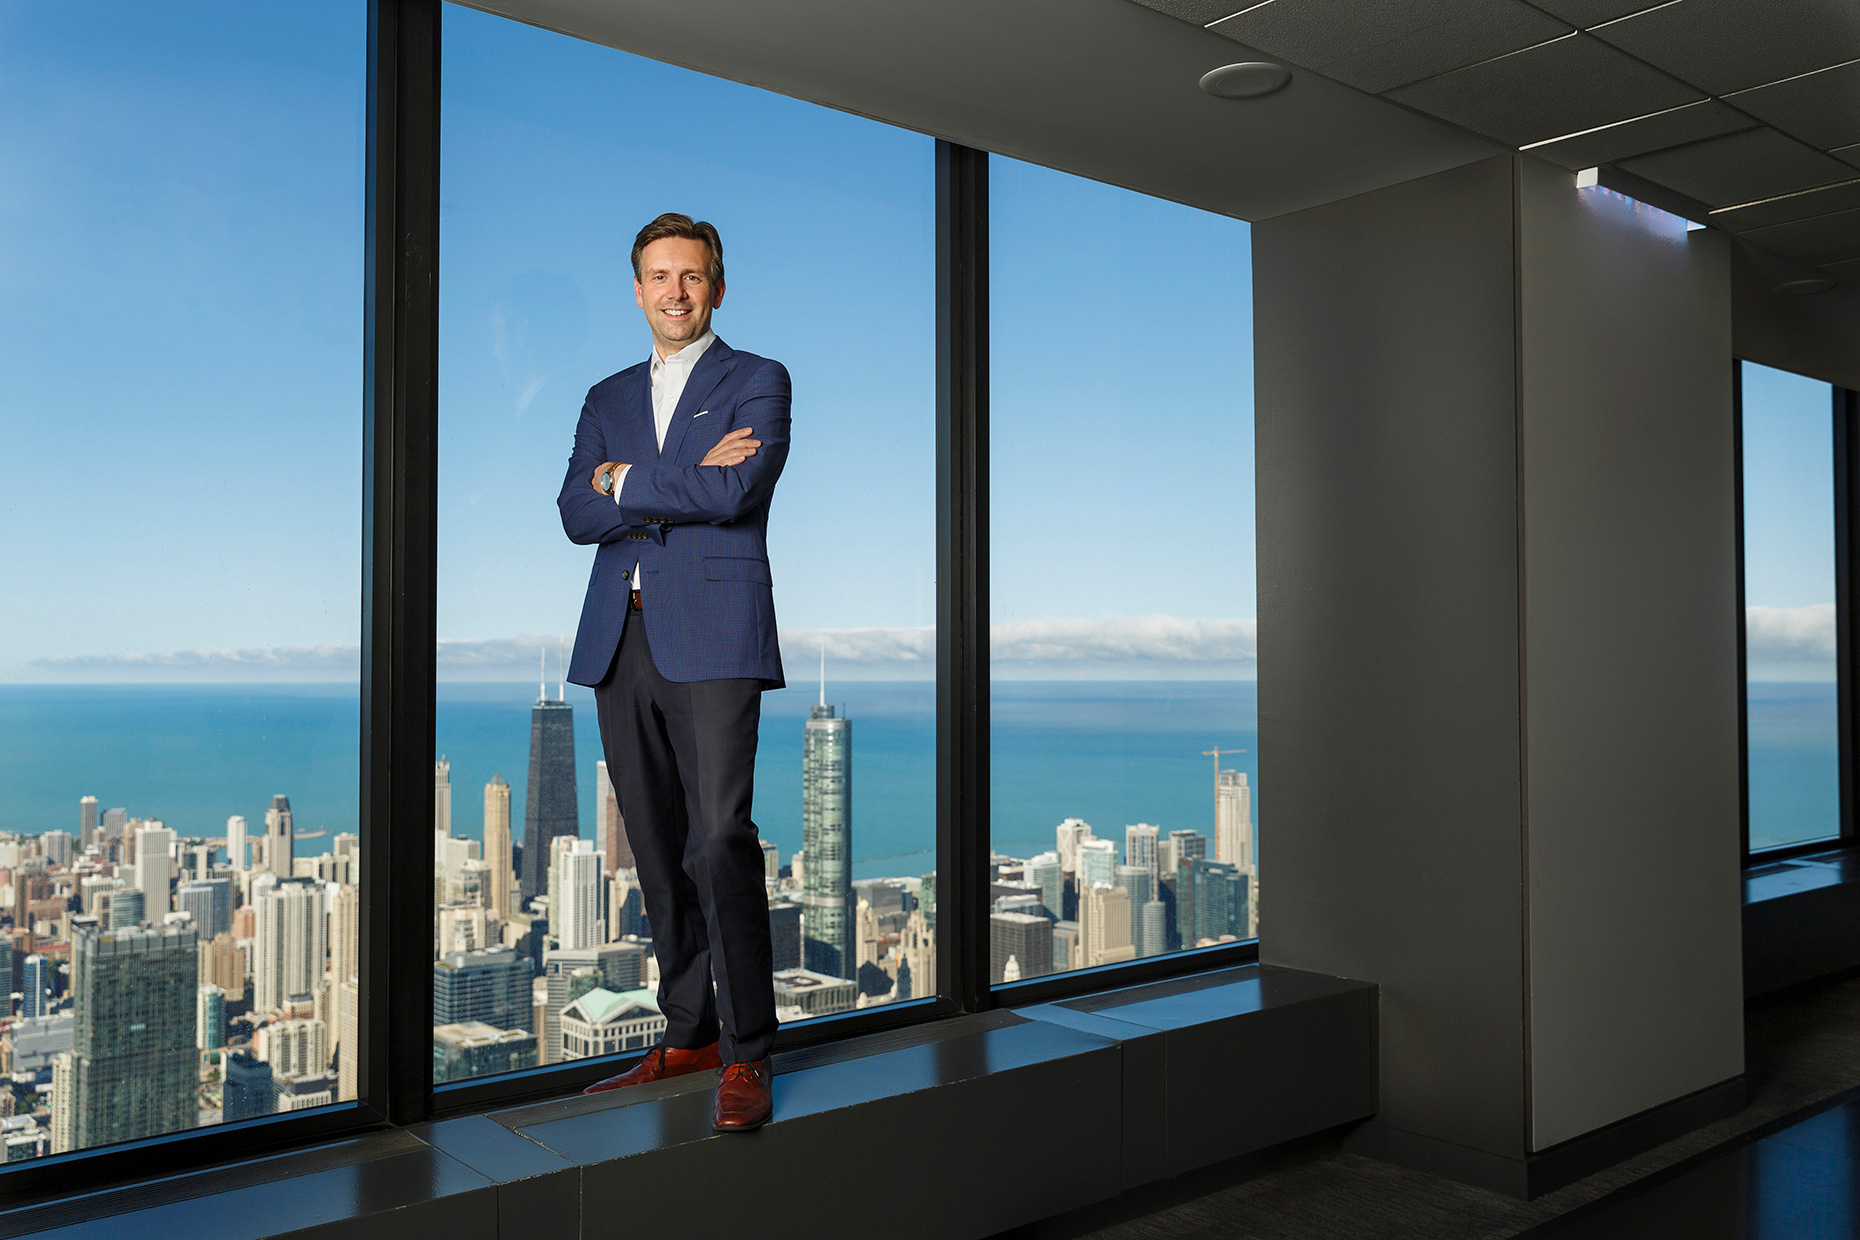 Corporate photographer  - Josh Earnest of United Airlines with the Chicago skyline